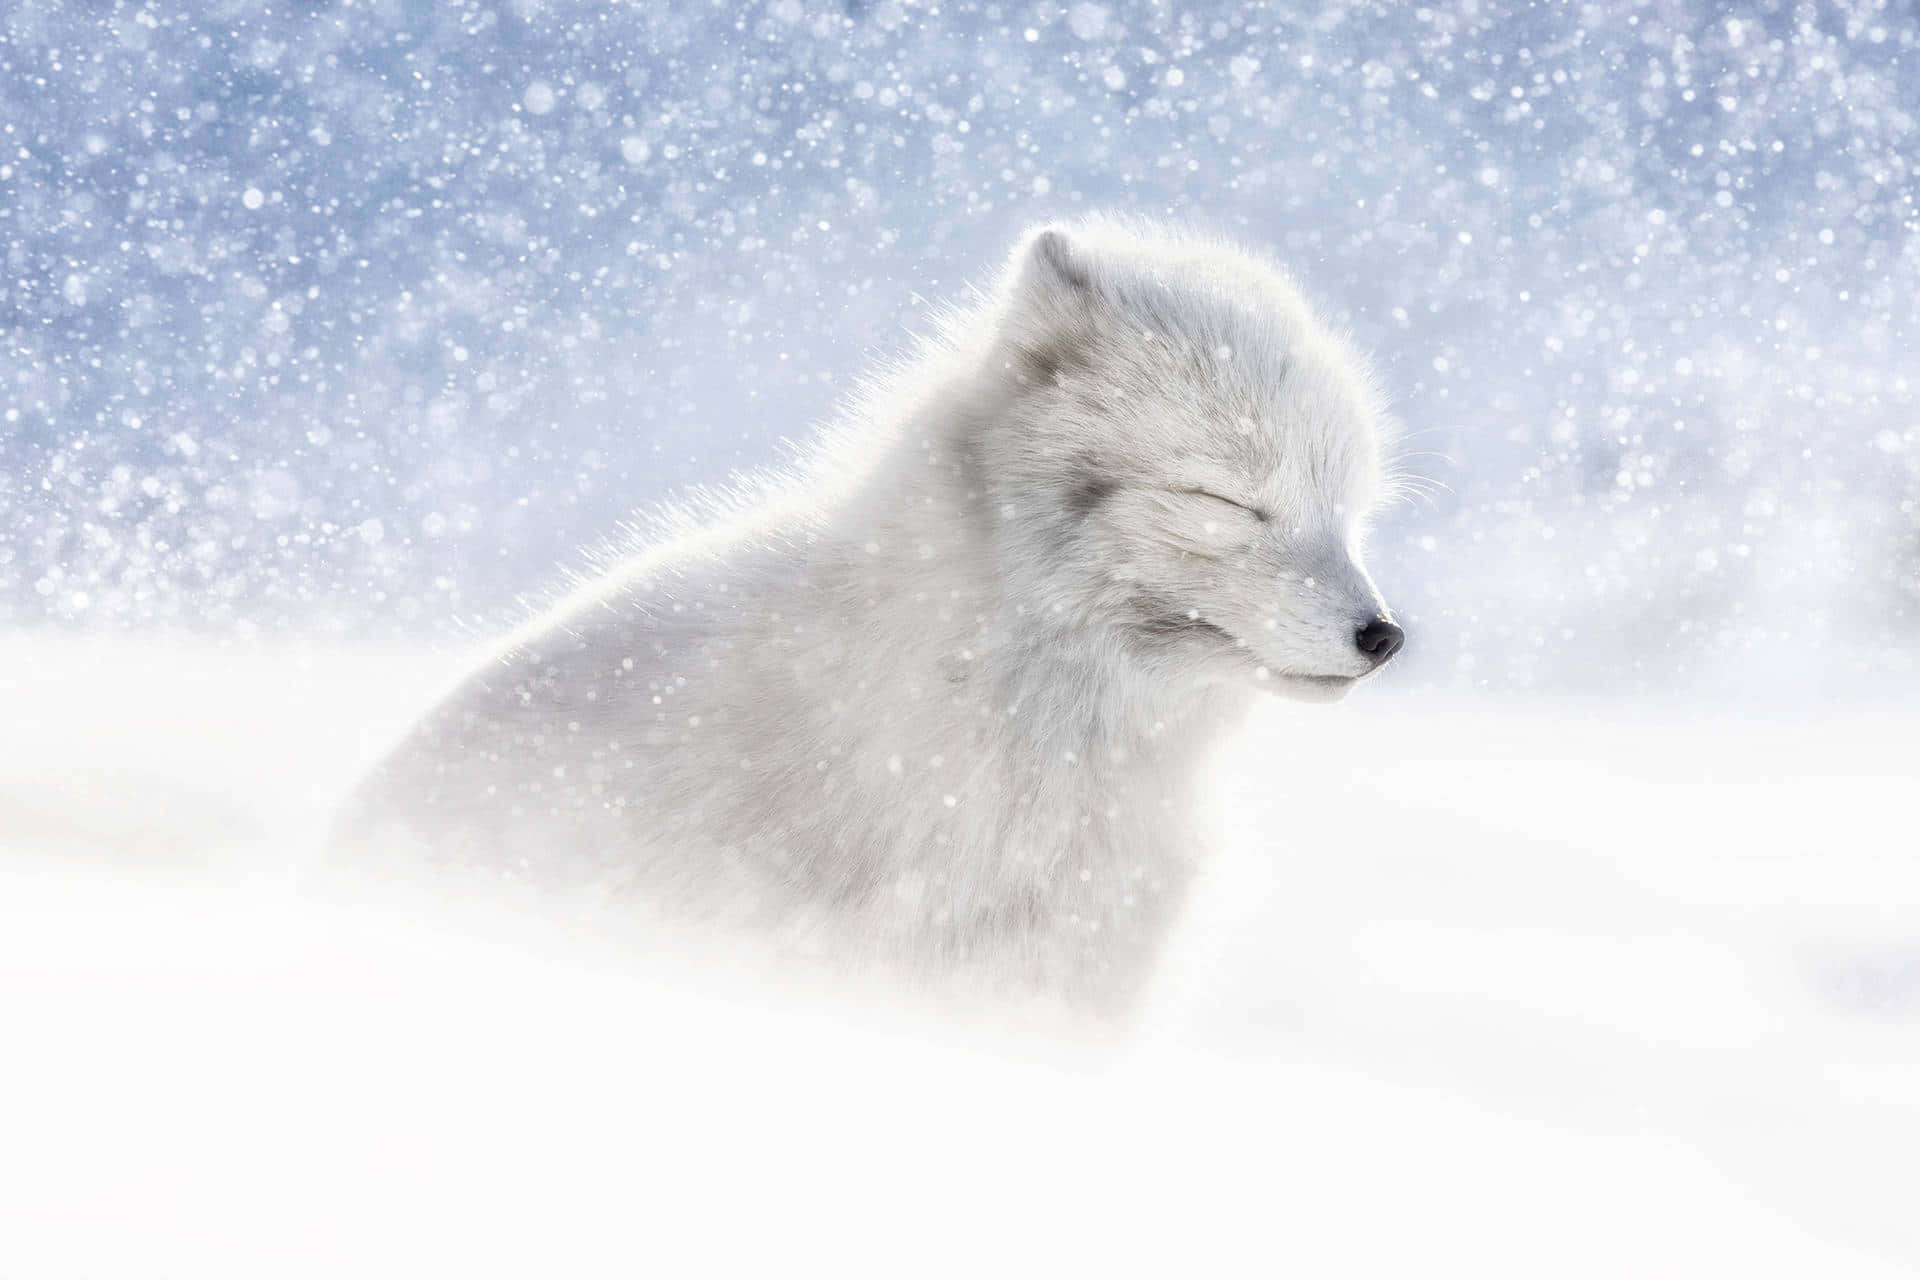 A white arctic fox blending into the icy terrain